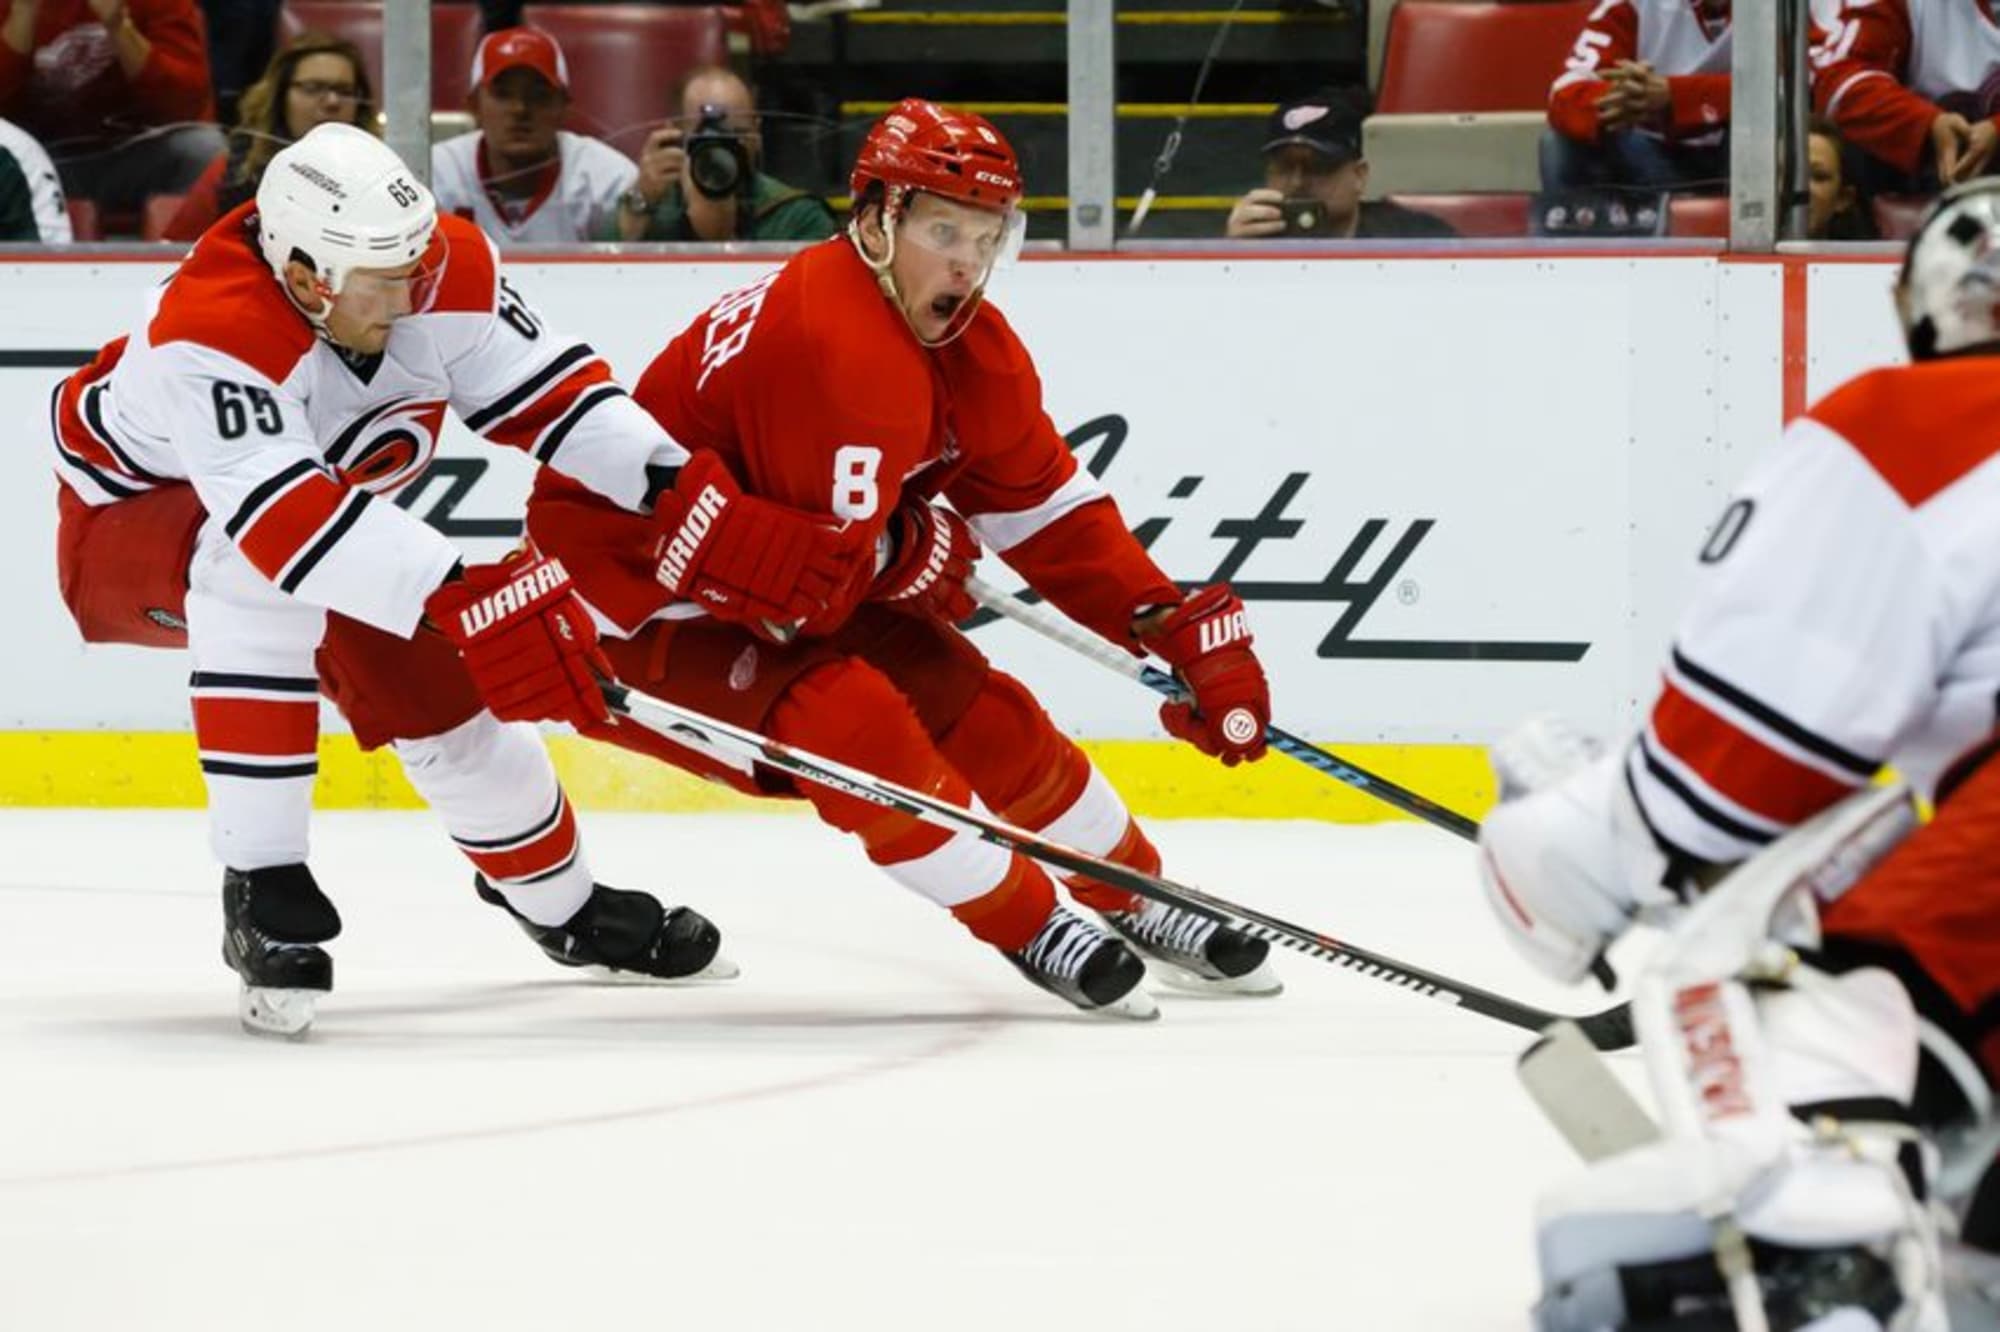 Detroit Red Wings at Hurricanes: Game Time, TV, Radio, Live Stream